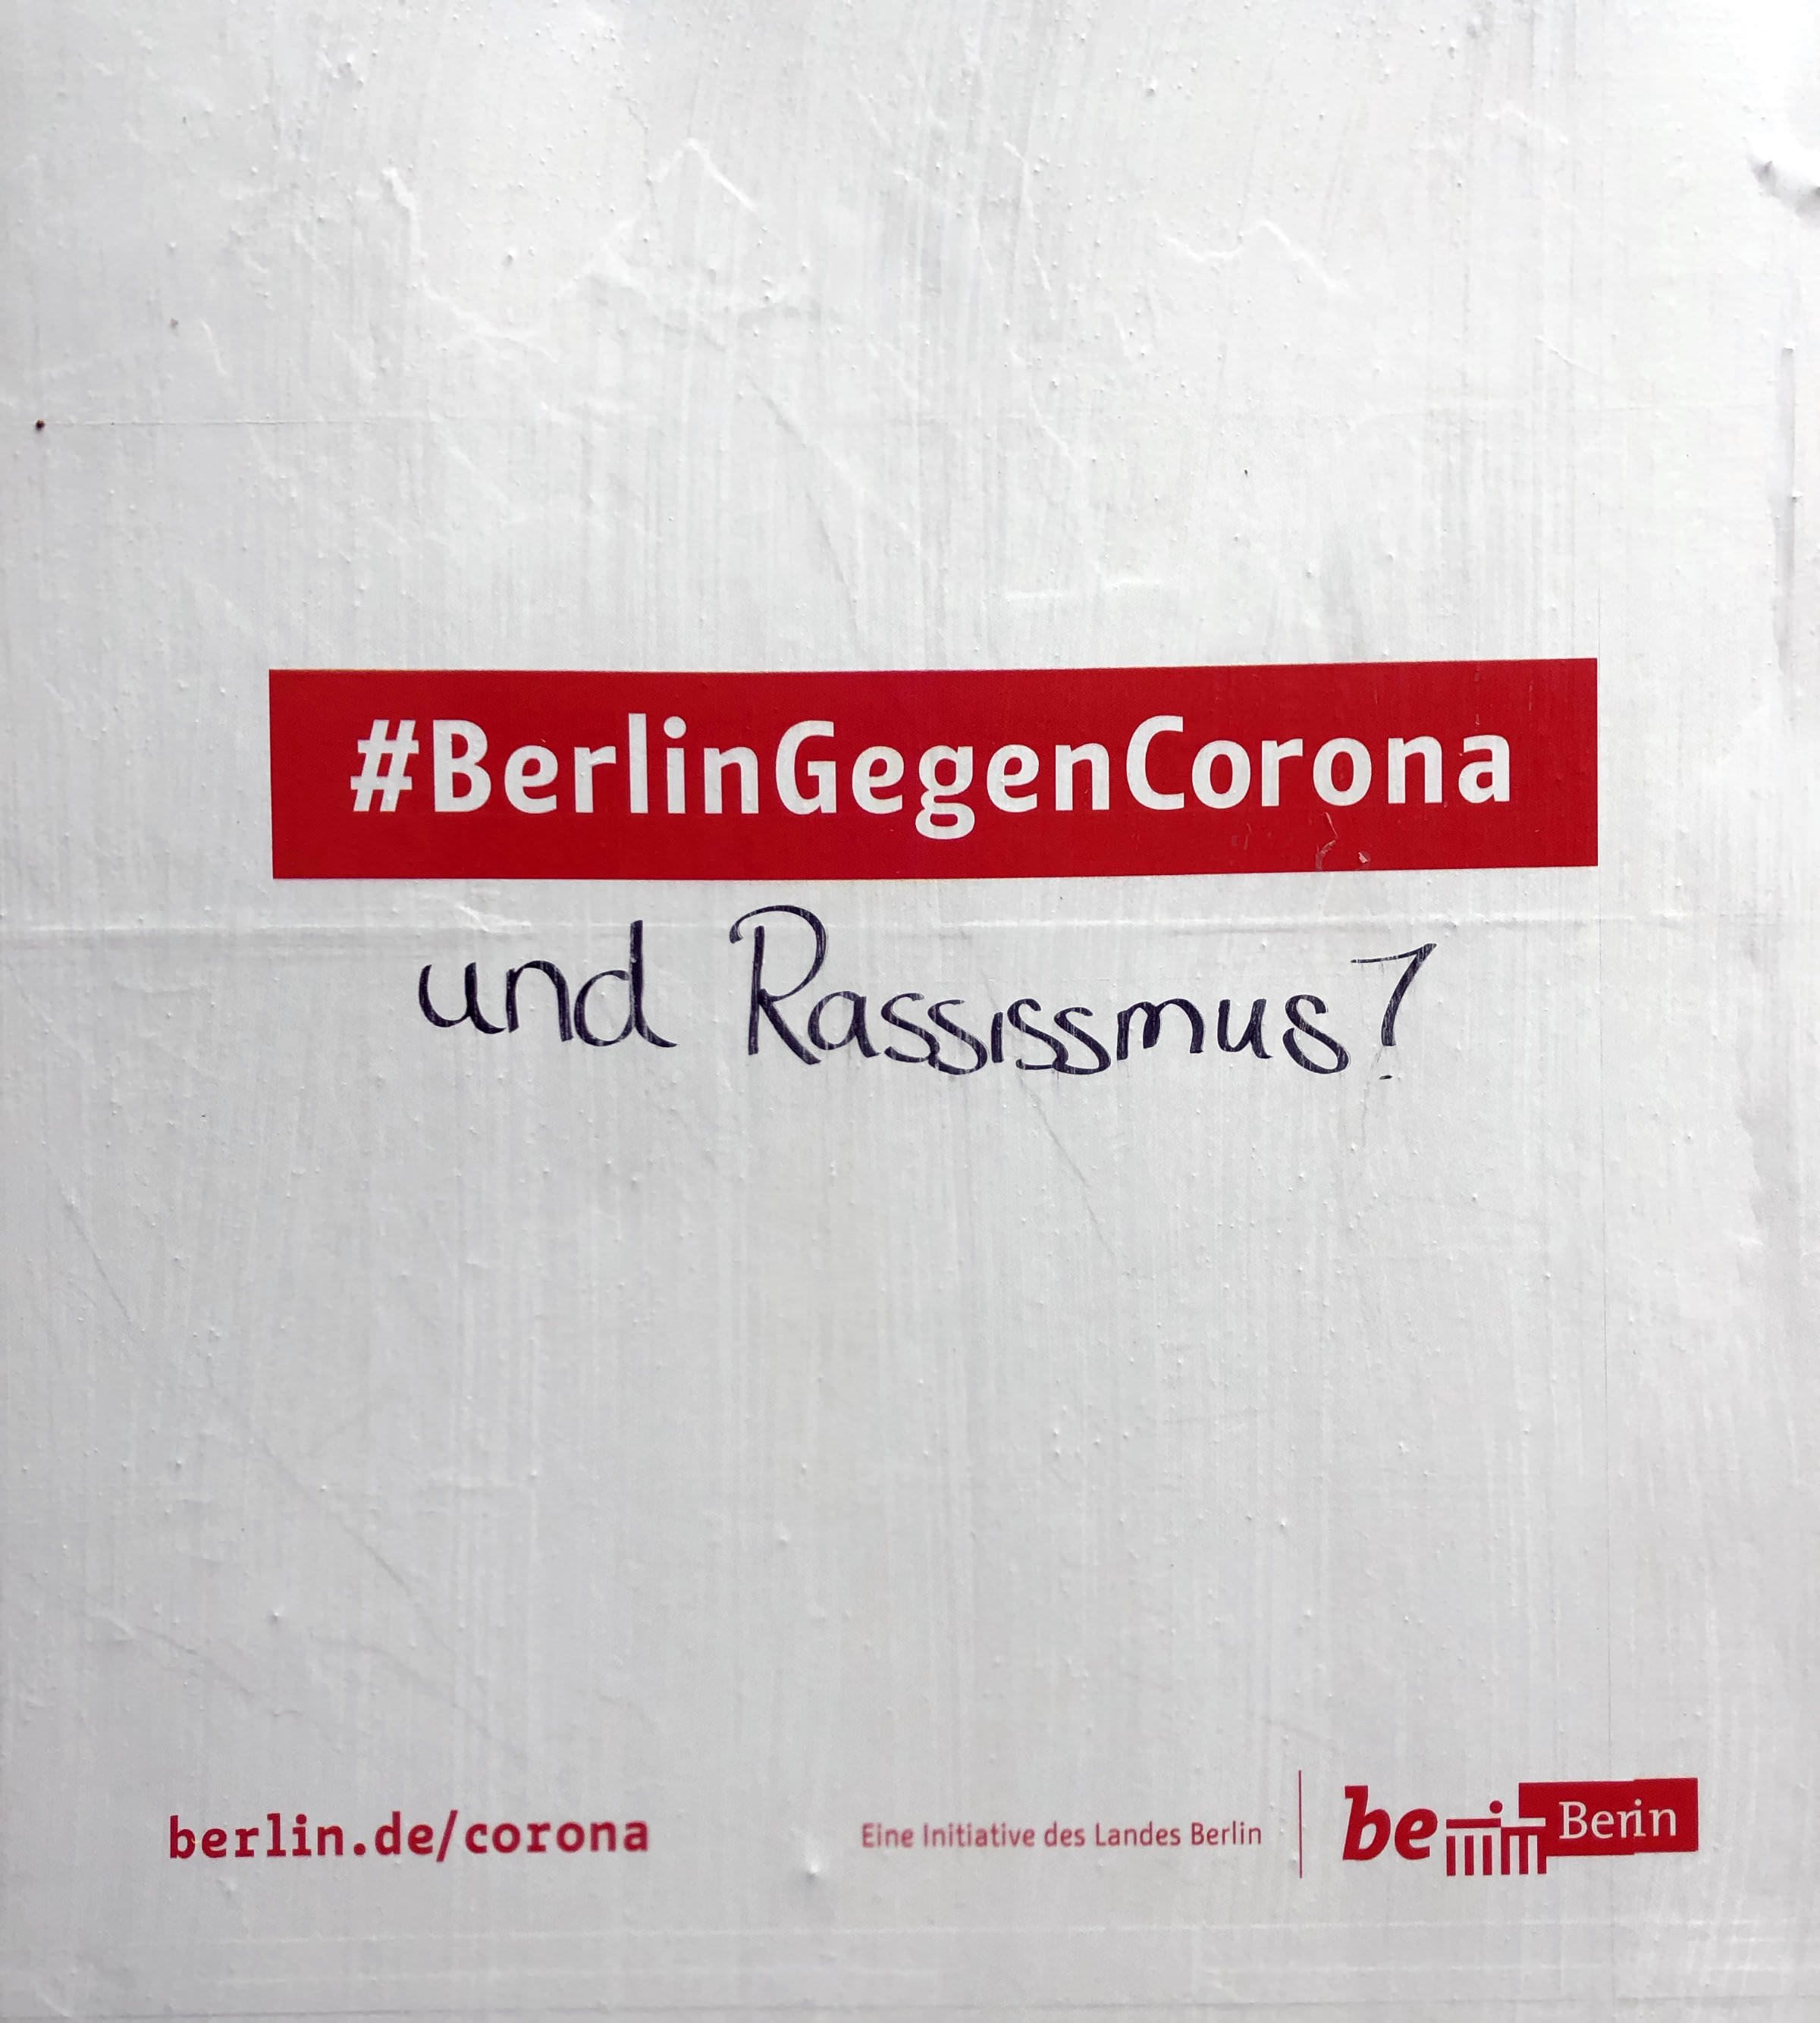 Change Letter (yet unreleased) and Change in use as Berlin’s corporate typeface